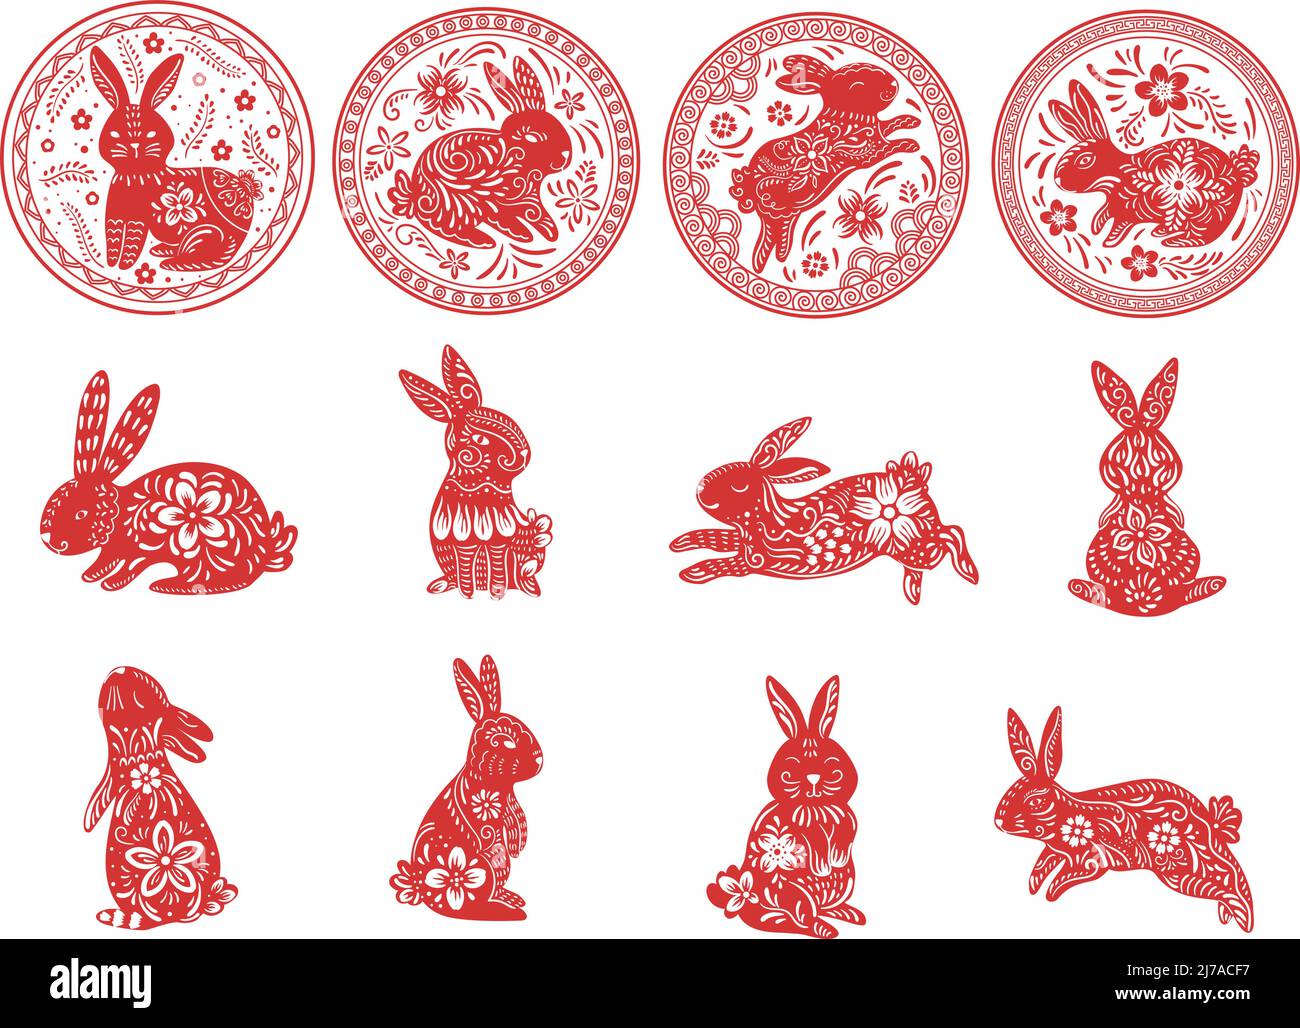 Zodiac rabbit. Chinese lunar new year animal with flowers ornaments